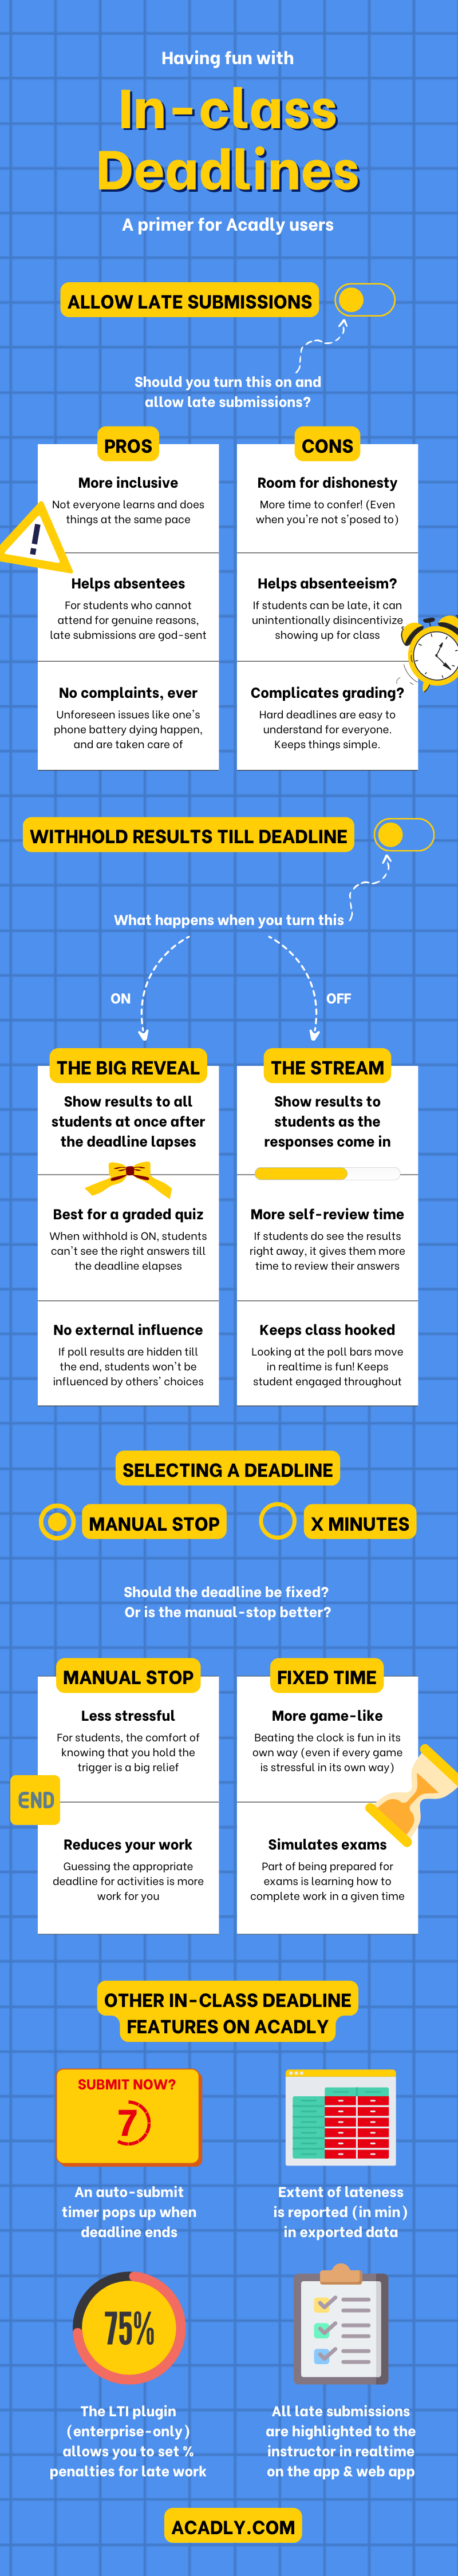 Infographic describing deadline settings on Acadly and the pros and cons of these decisions.